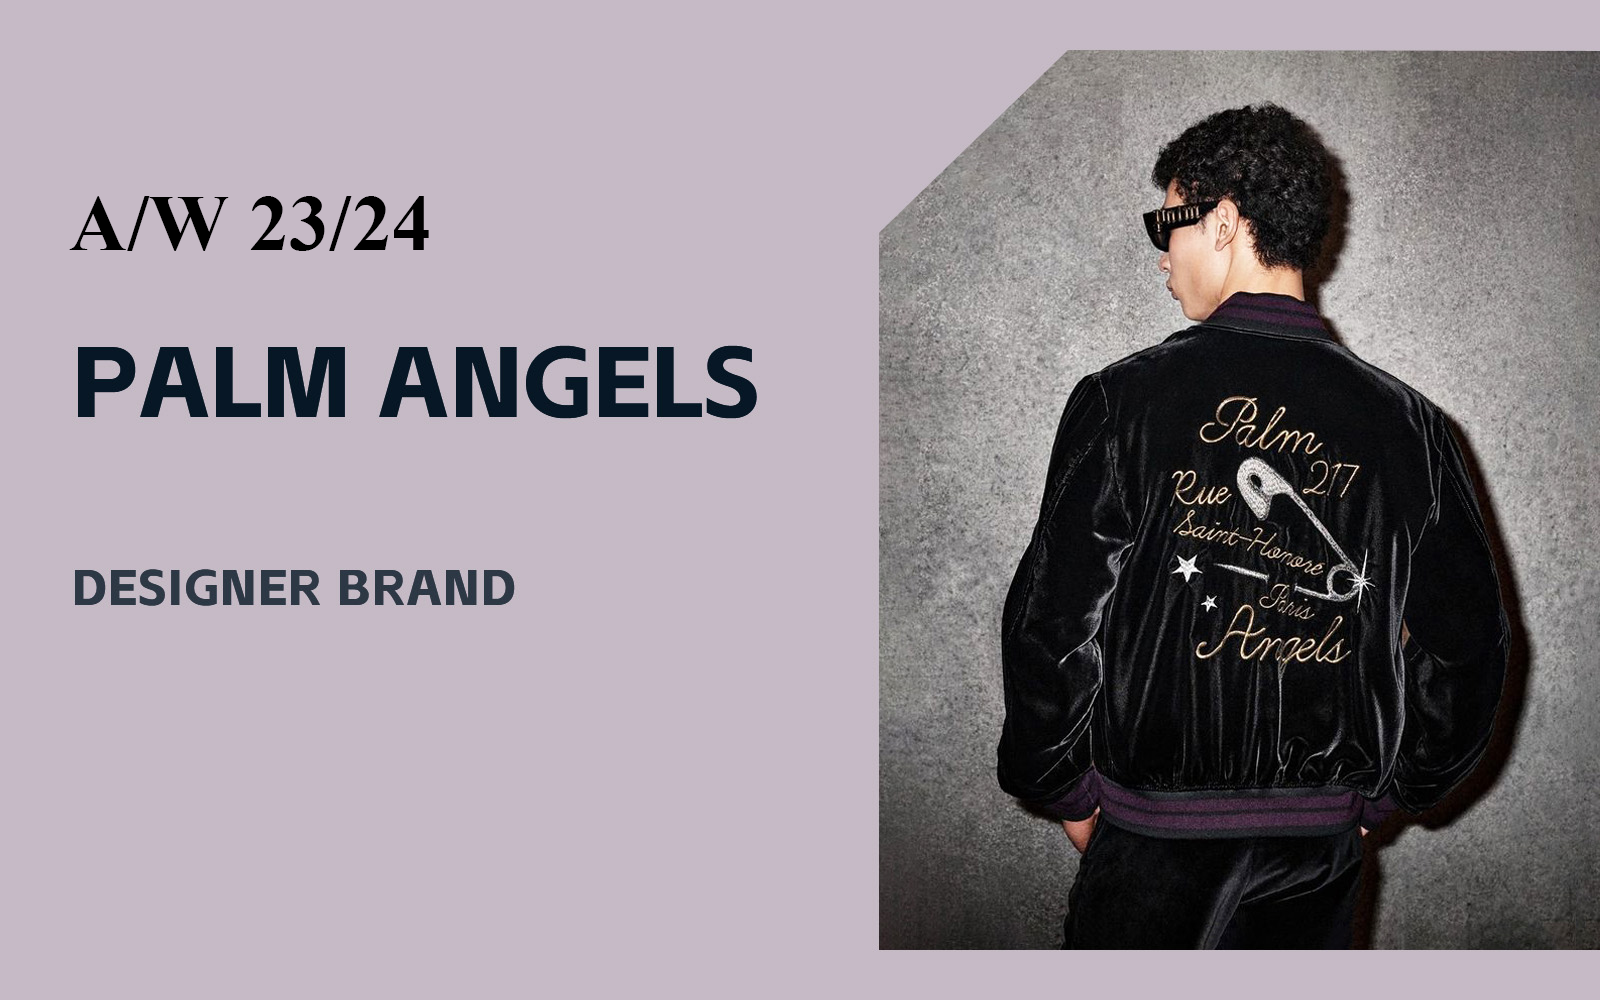 California Post College -- The Analysis of Palm Angels The Menswear Designer Brand